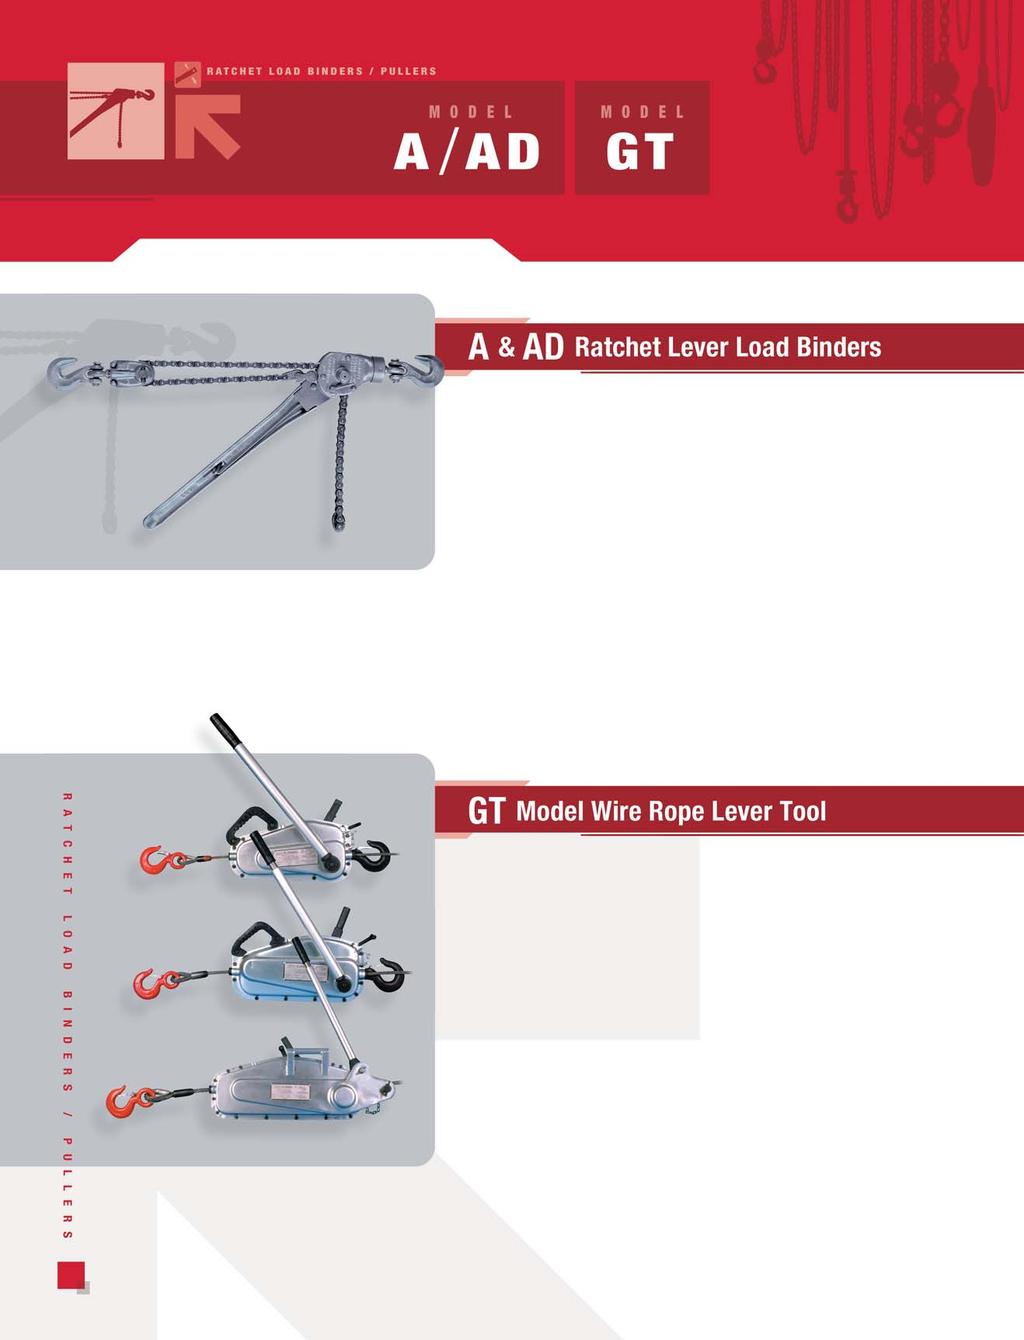 COFFING A and AD Models - Roller chain load binders provide quality and durability.